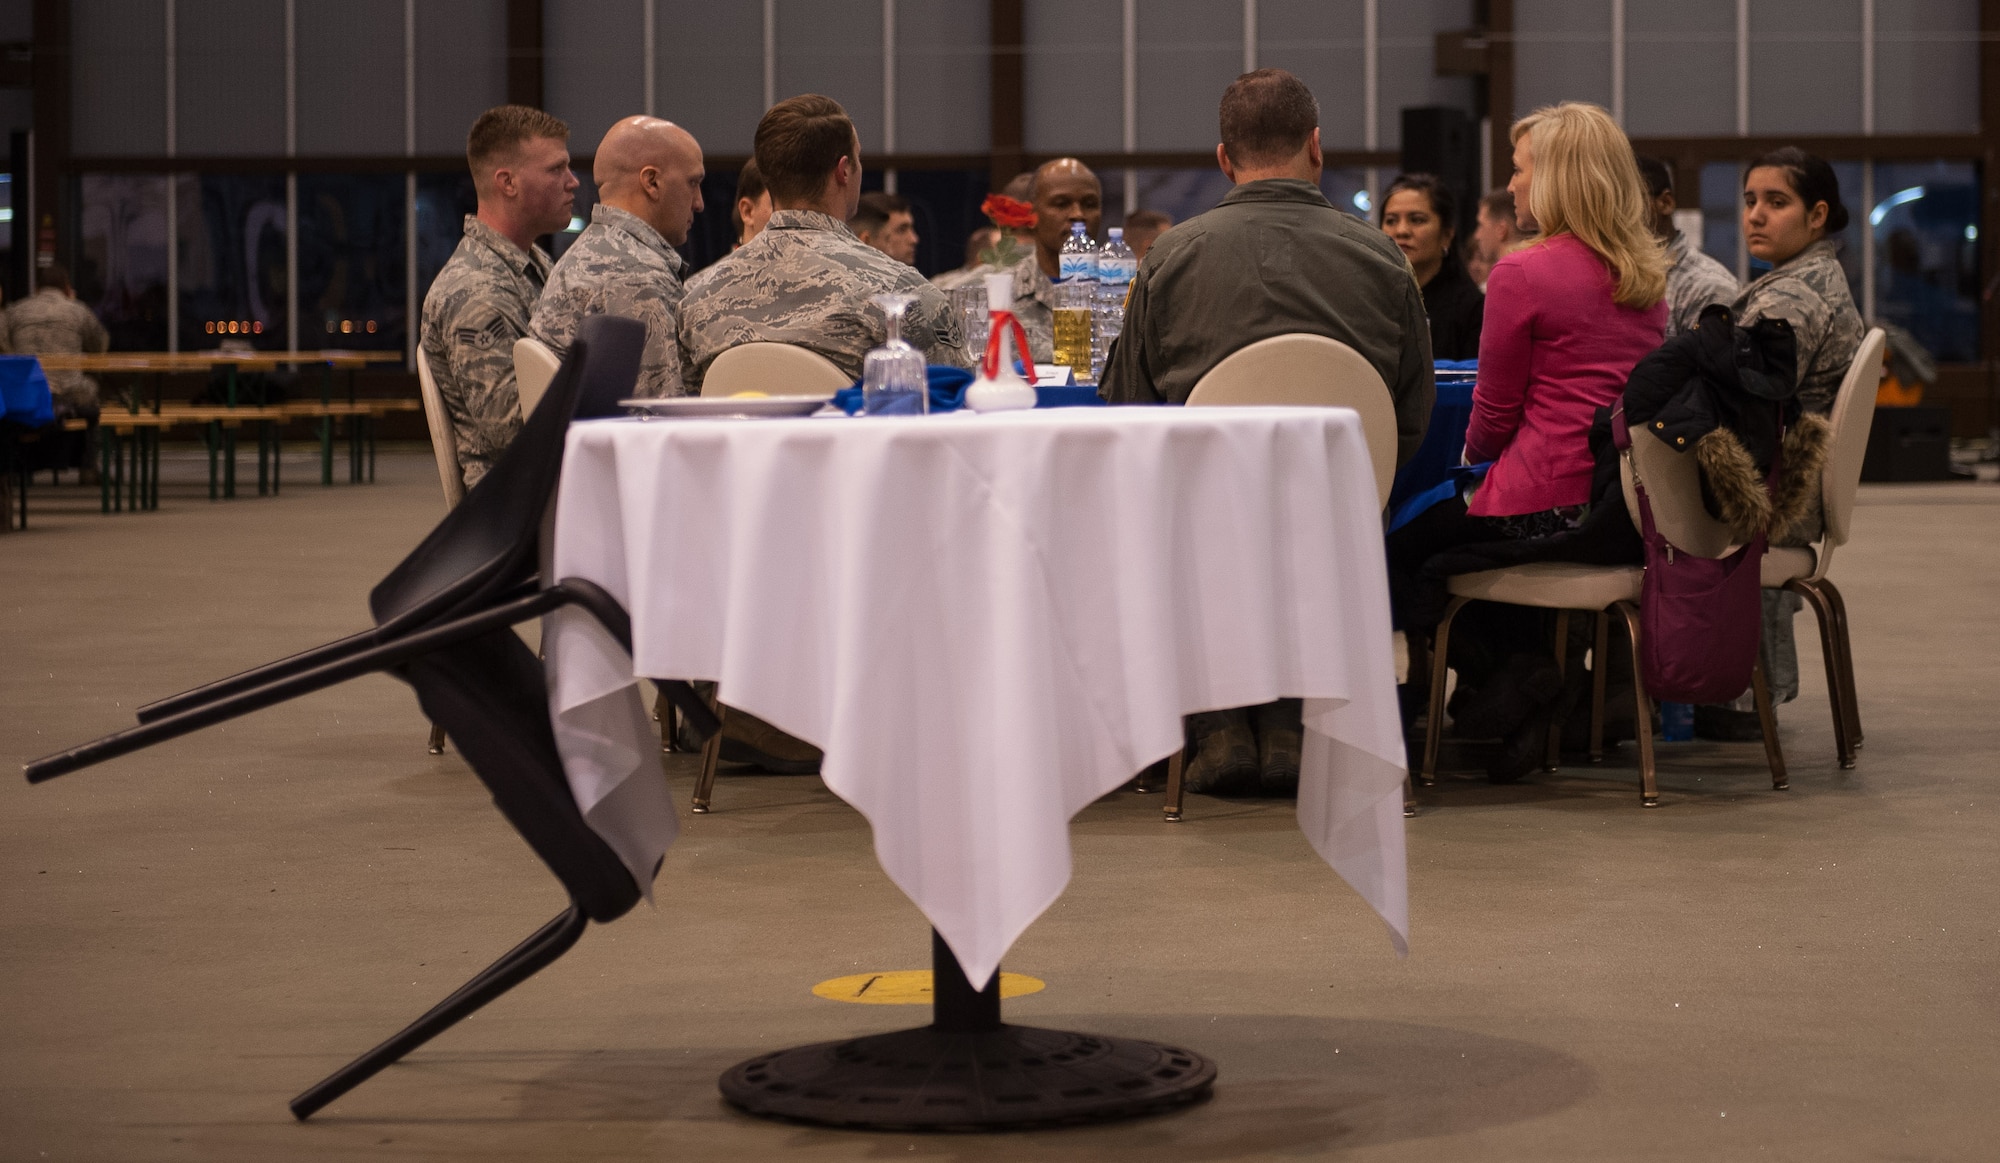 A POW/MIA table sits in front of a crowd during the 2016 Maintenance and Logistics Airmen Annual Award Ceremony on Ramstein Air Base, Germany, Feb. 17, 2017. Also known as the missing man table, the setup is used in military dining facilities of the U.S. armed forces and during special occasions to commemorate the fallen, missing, or imprisoned service members. It originated out of U.S. concern of the Vietnam War’s large POW/MIA numbers. (U.S. Air Force photo by Senior Airman Lane T. Plummer)